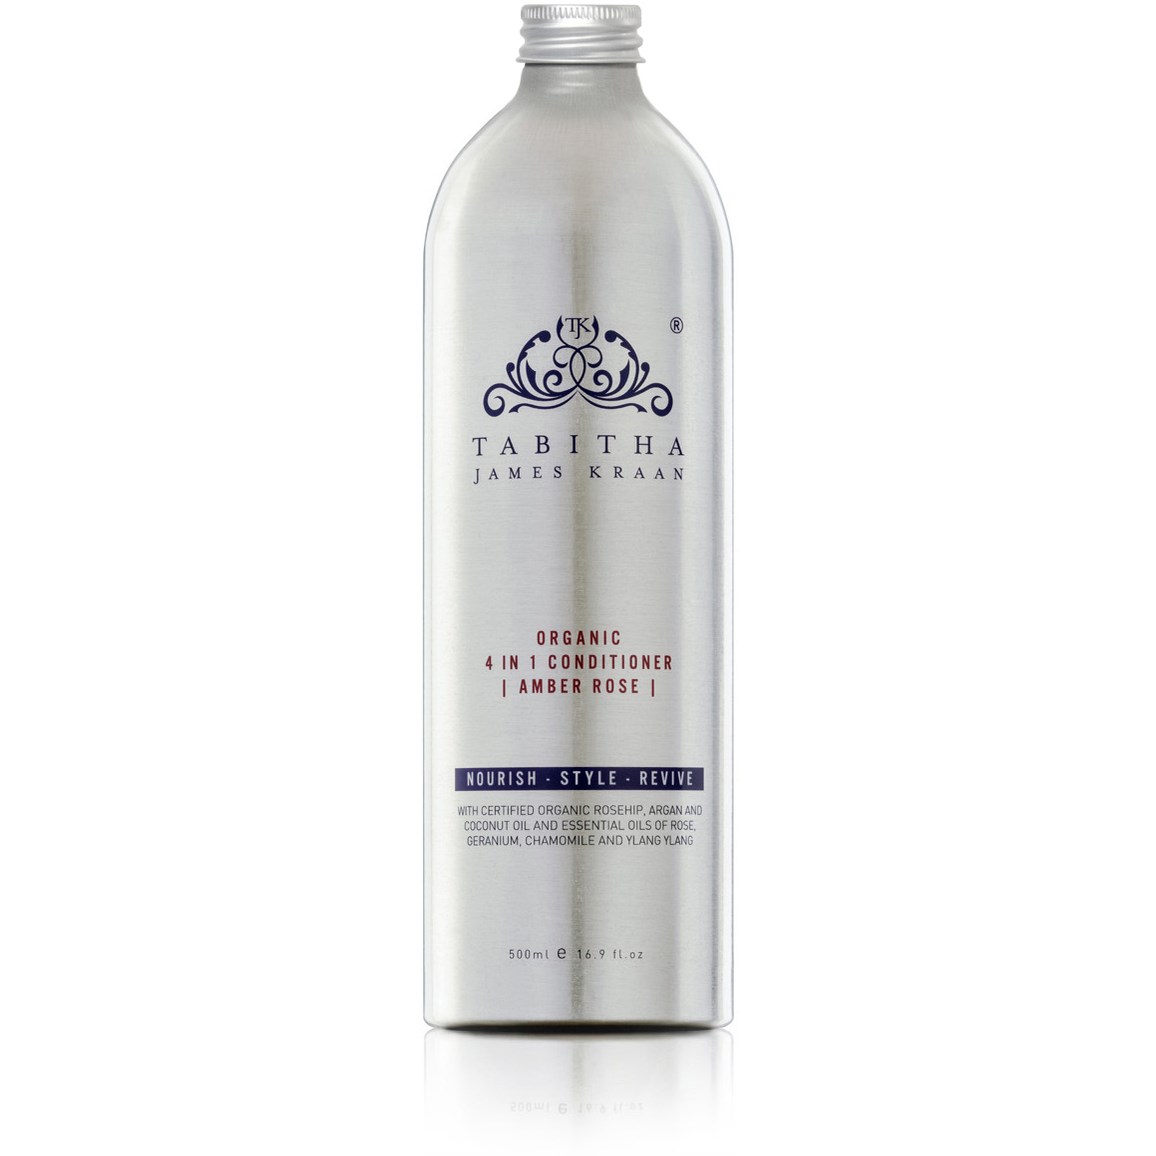 Tabitha James Kraan 4 in 1 Conditioner Amber Rose Large 500 ml